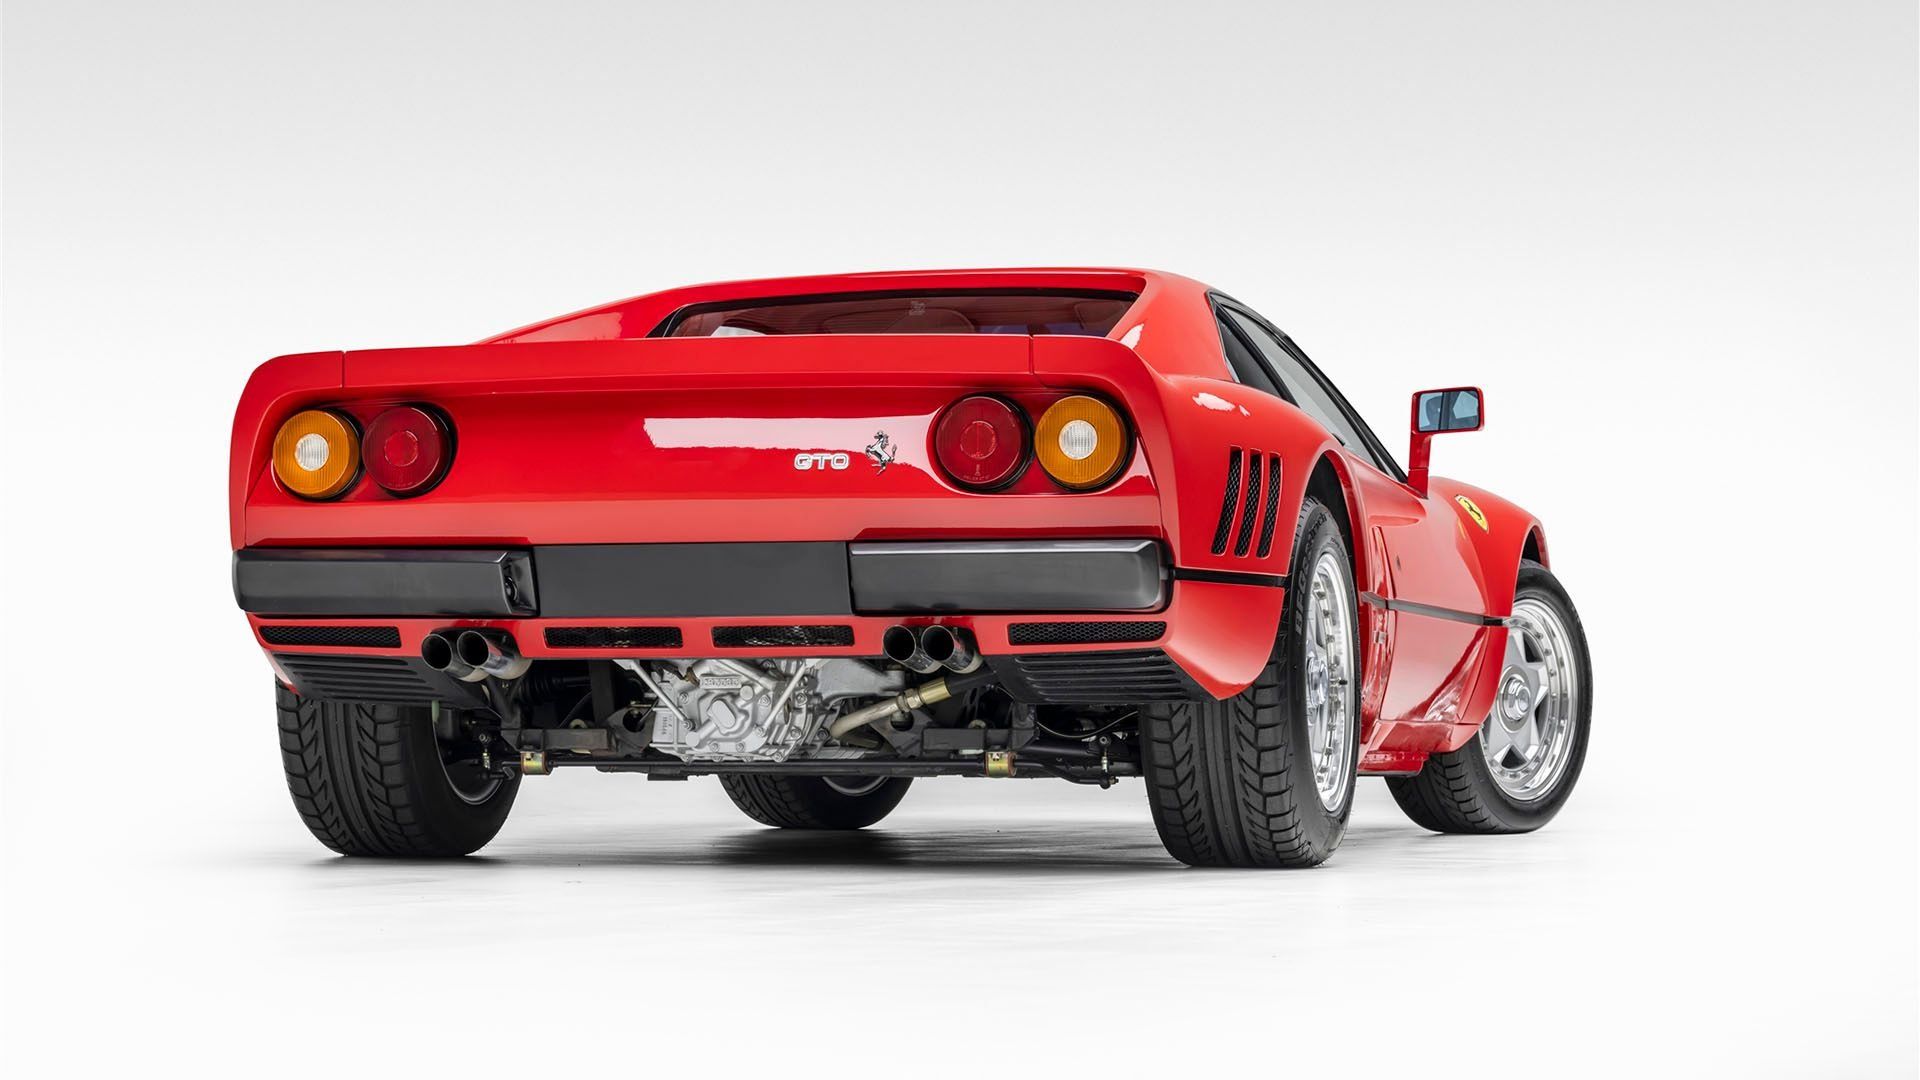 handpicked, sports, american, news, highlights, newsletter, muscle, client, classic, modern classic, europe, features, luxury, trucks, celebrity, off-road, german, broad arrow auctions is selling a ferrari 288 gto at no reserve